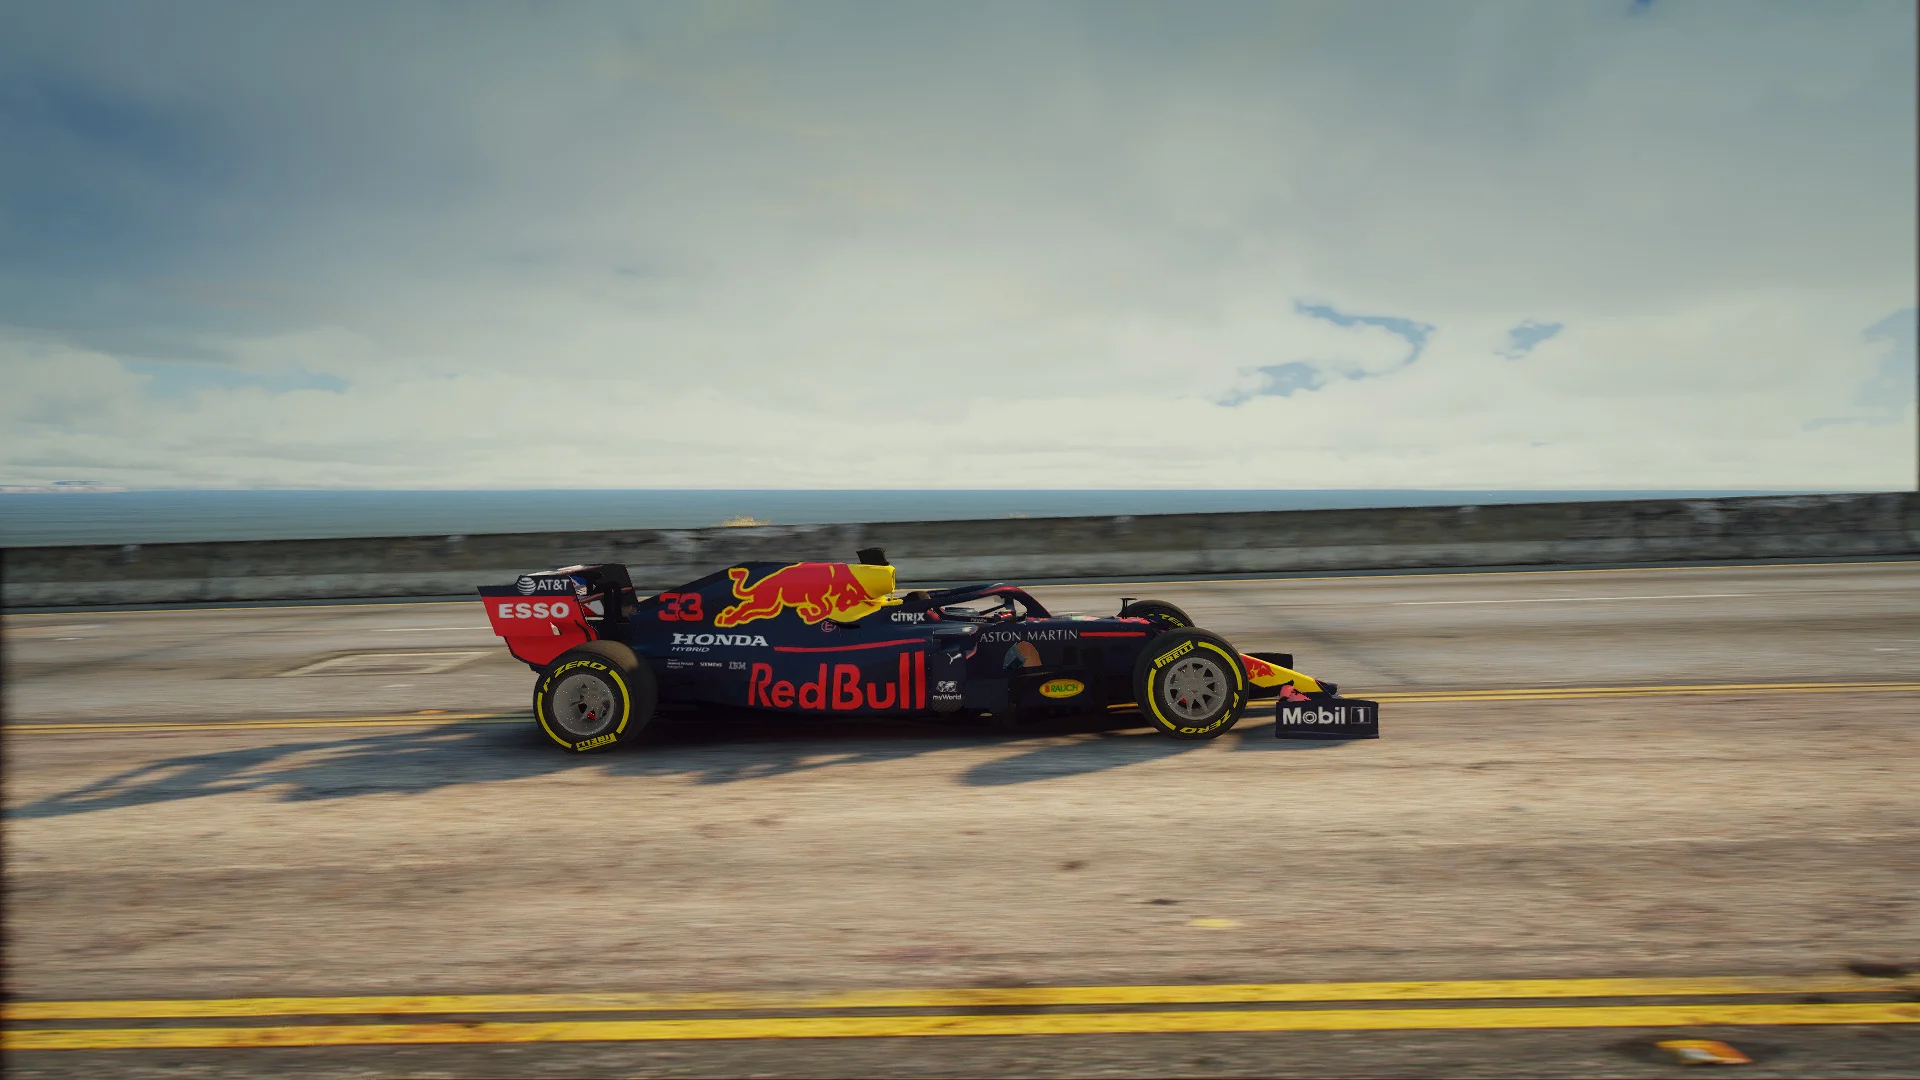 RB16 Aston Martin Red Bull 2020 Formula One F1 [Add-On | Livery] 3.0